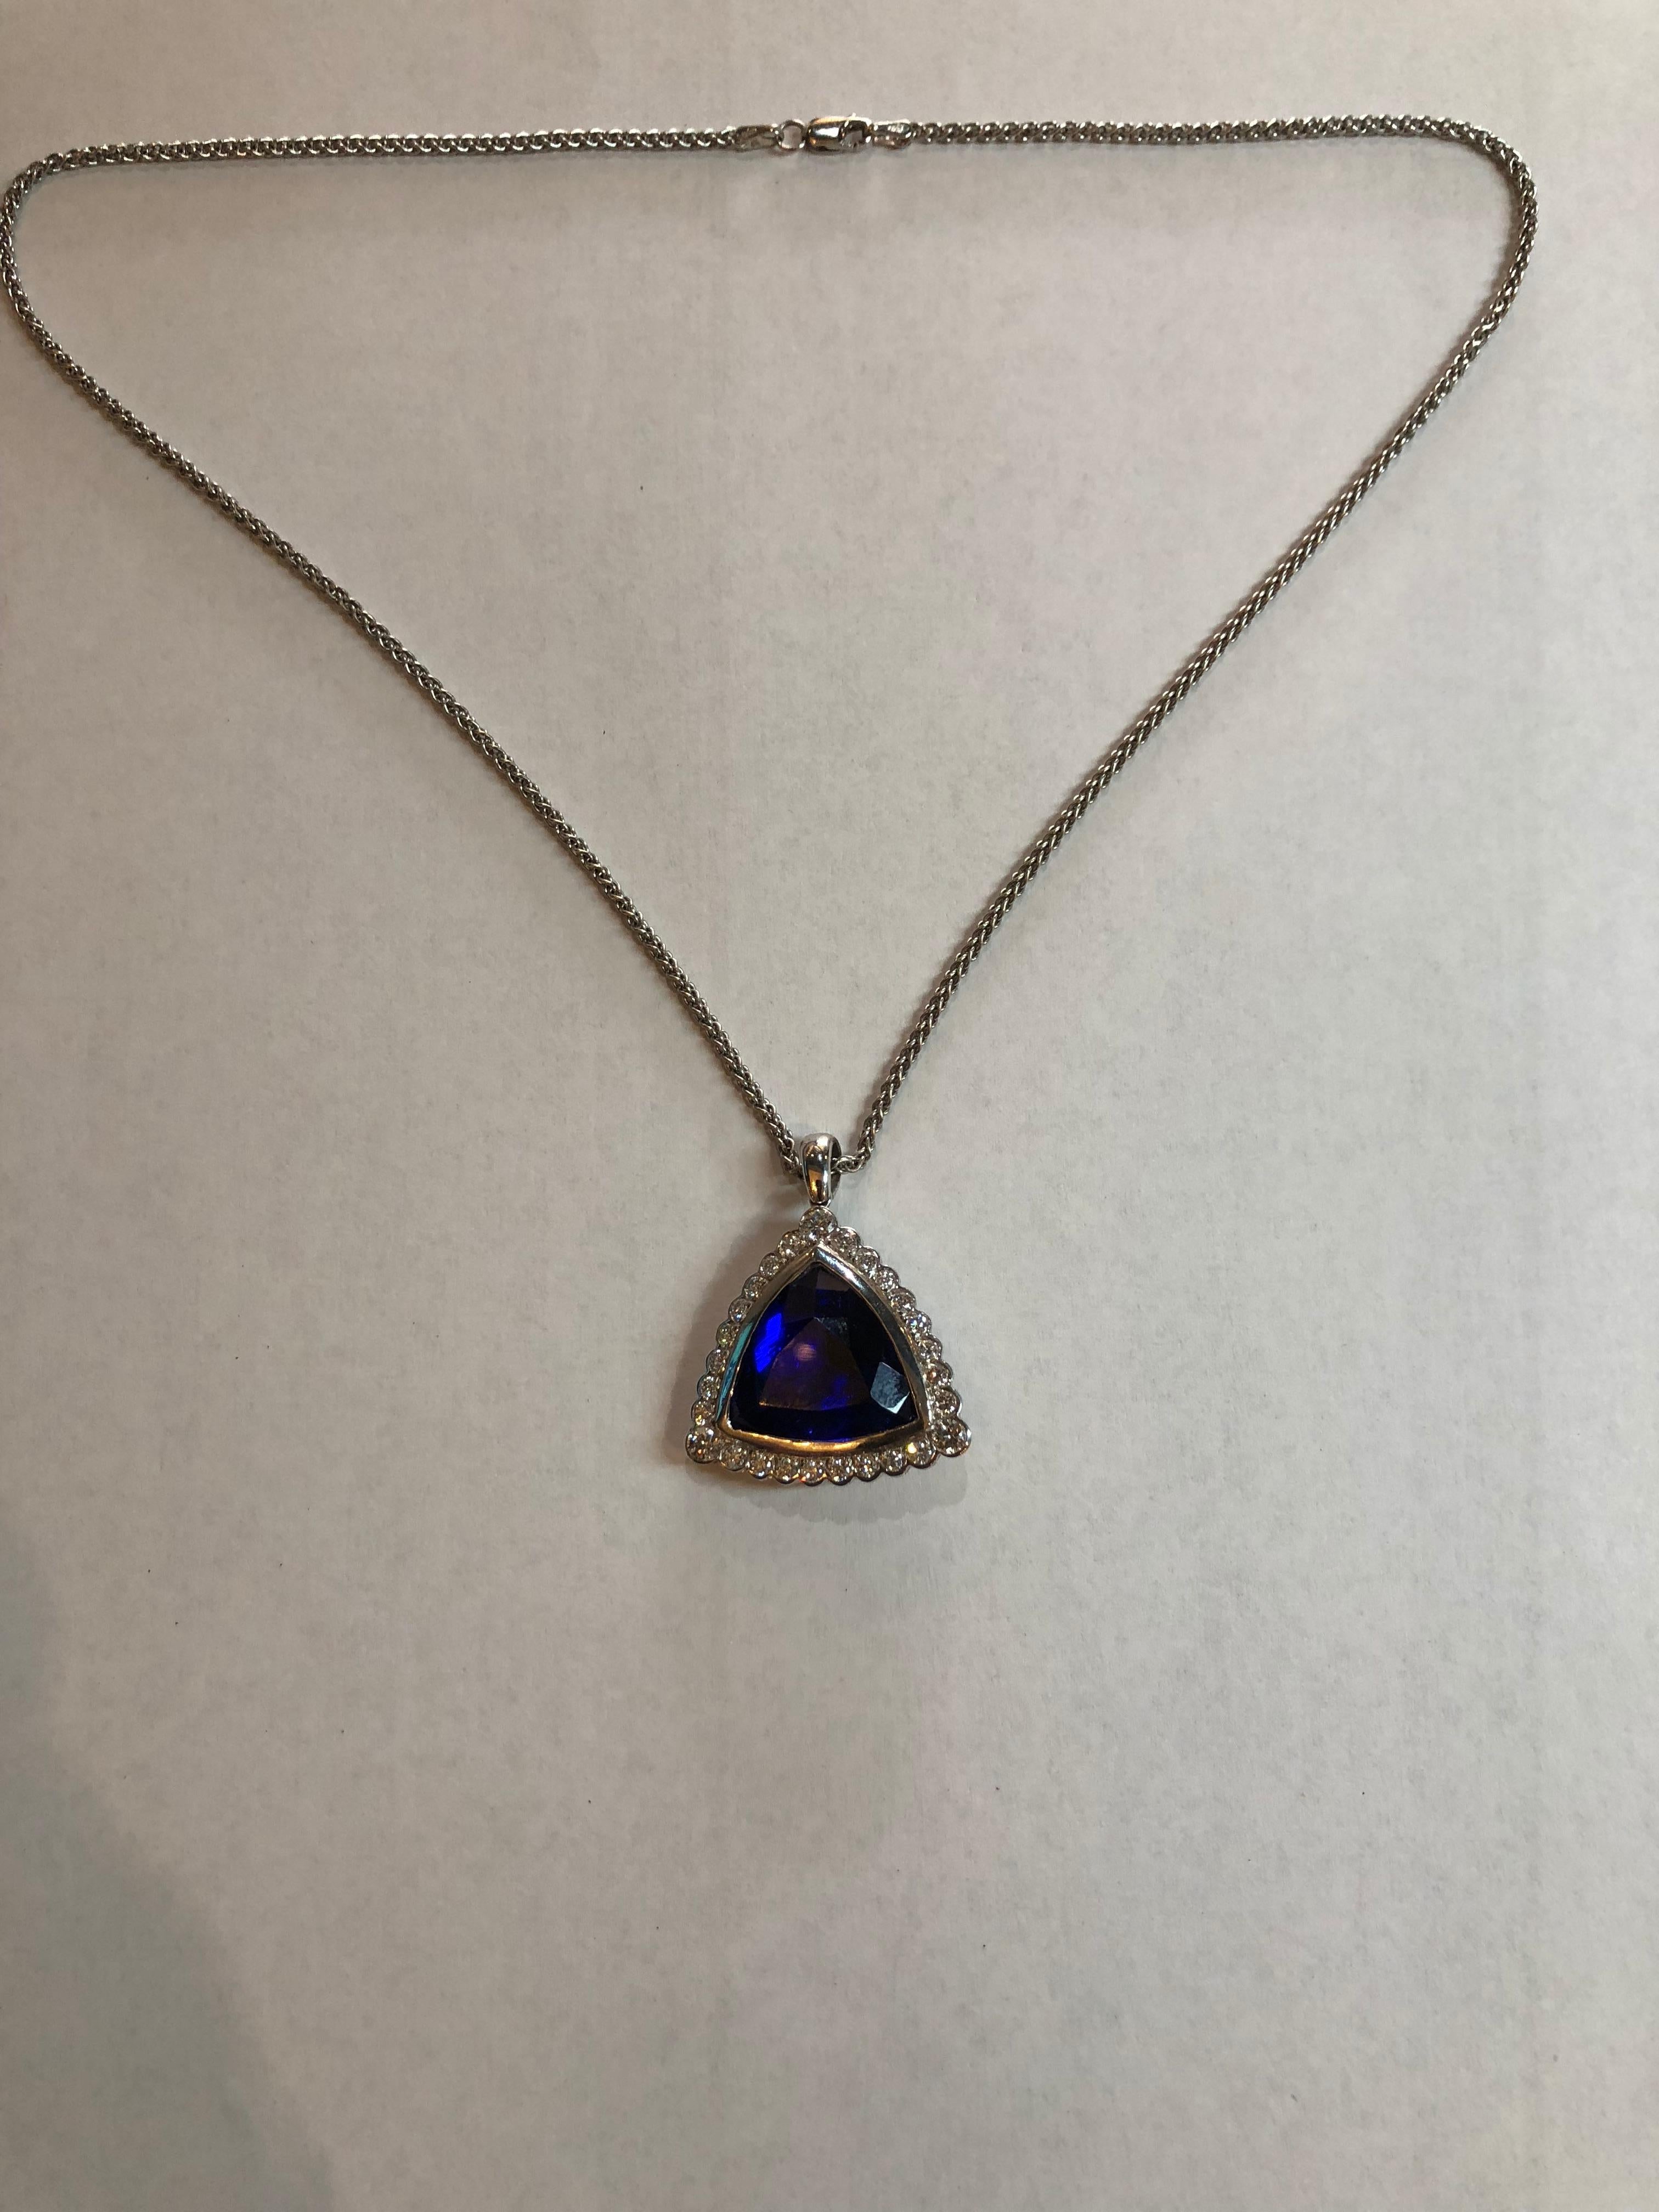 Pendant and Chain Combination 18K White Gold Weighing 19.0 Grams
Pendant contains a Tanzanite of fine quality, judged to be Near Flawless clarity and extra fine color of Medium tone and high intensity
Excellent Cut Trilliant measures approx 19.2mm